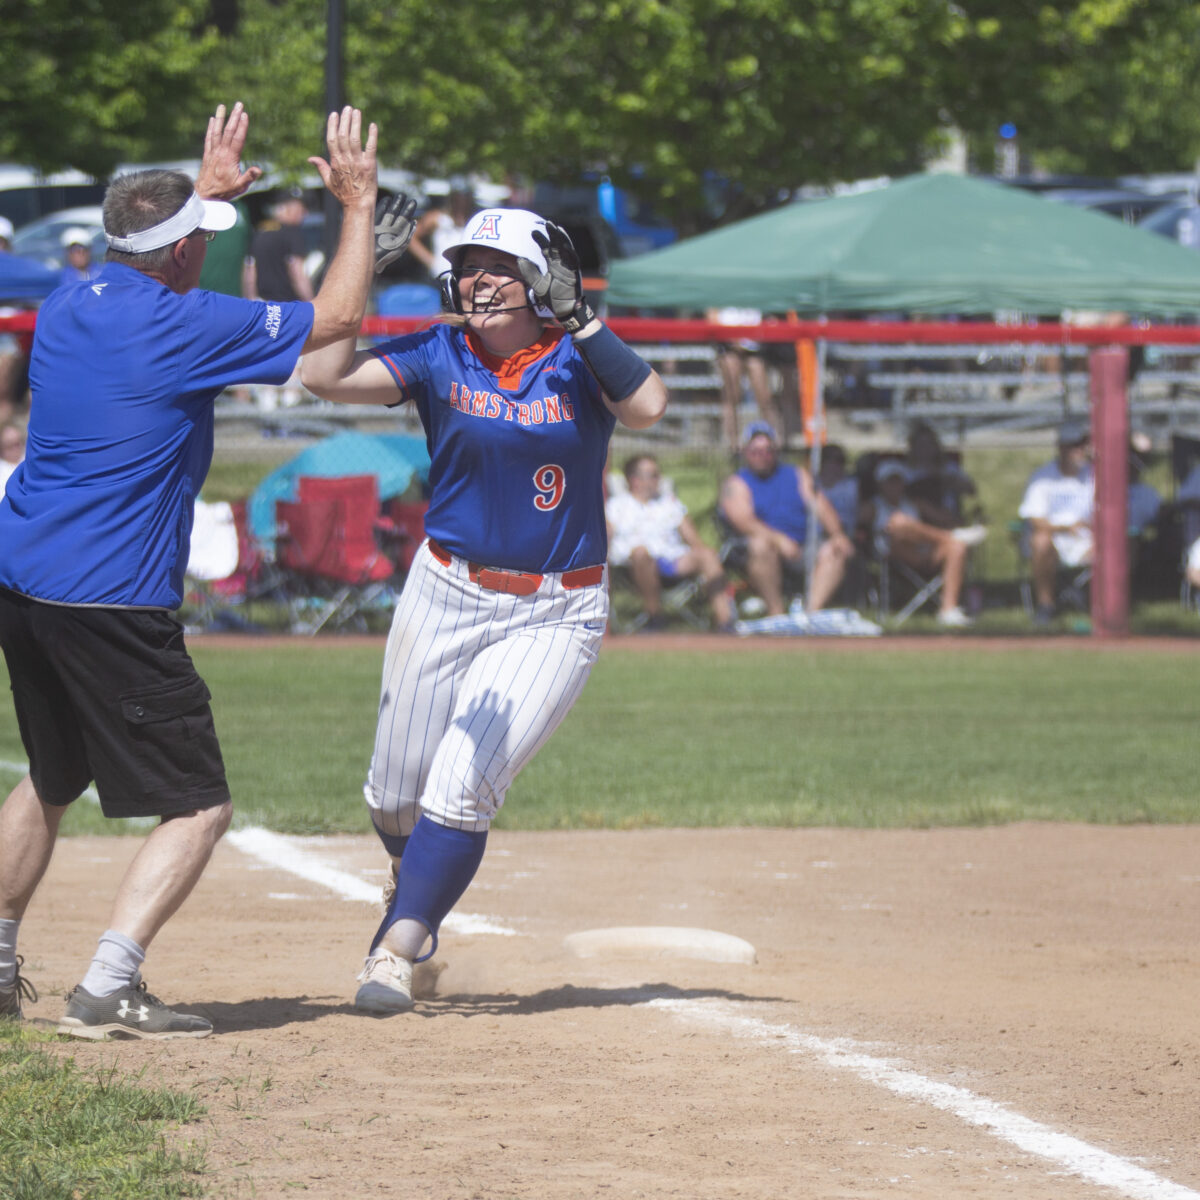 PUP softball notebook: Armstrong’s big bats back to bringing the lumber for red-hot River Hawks